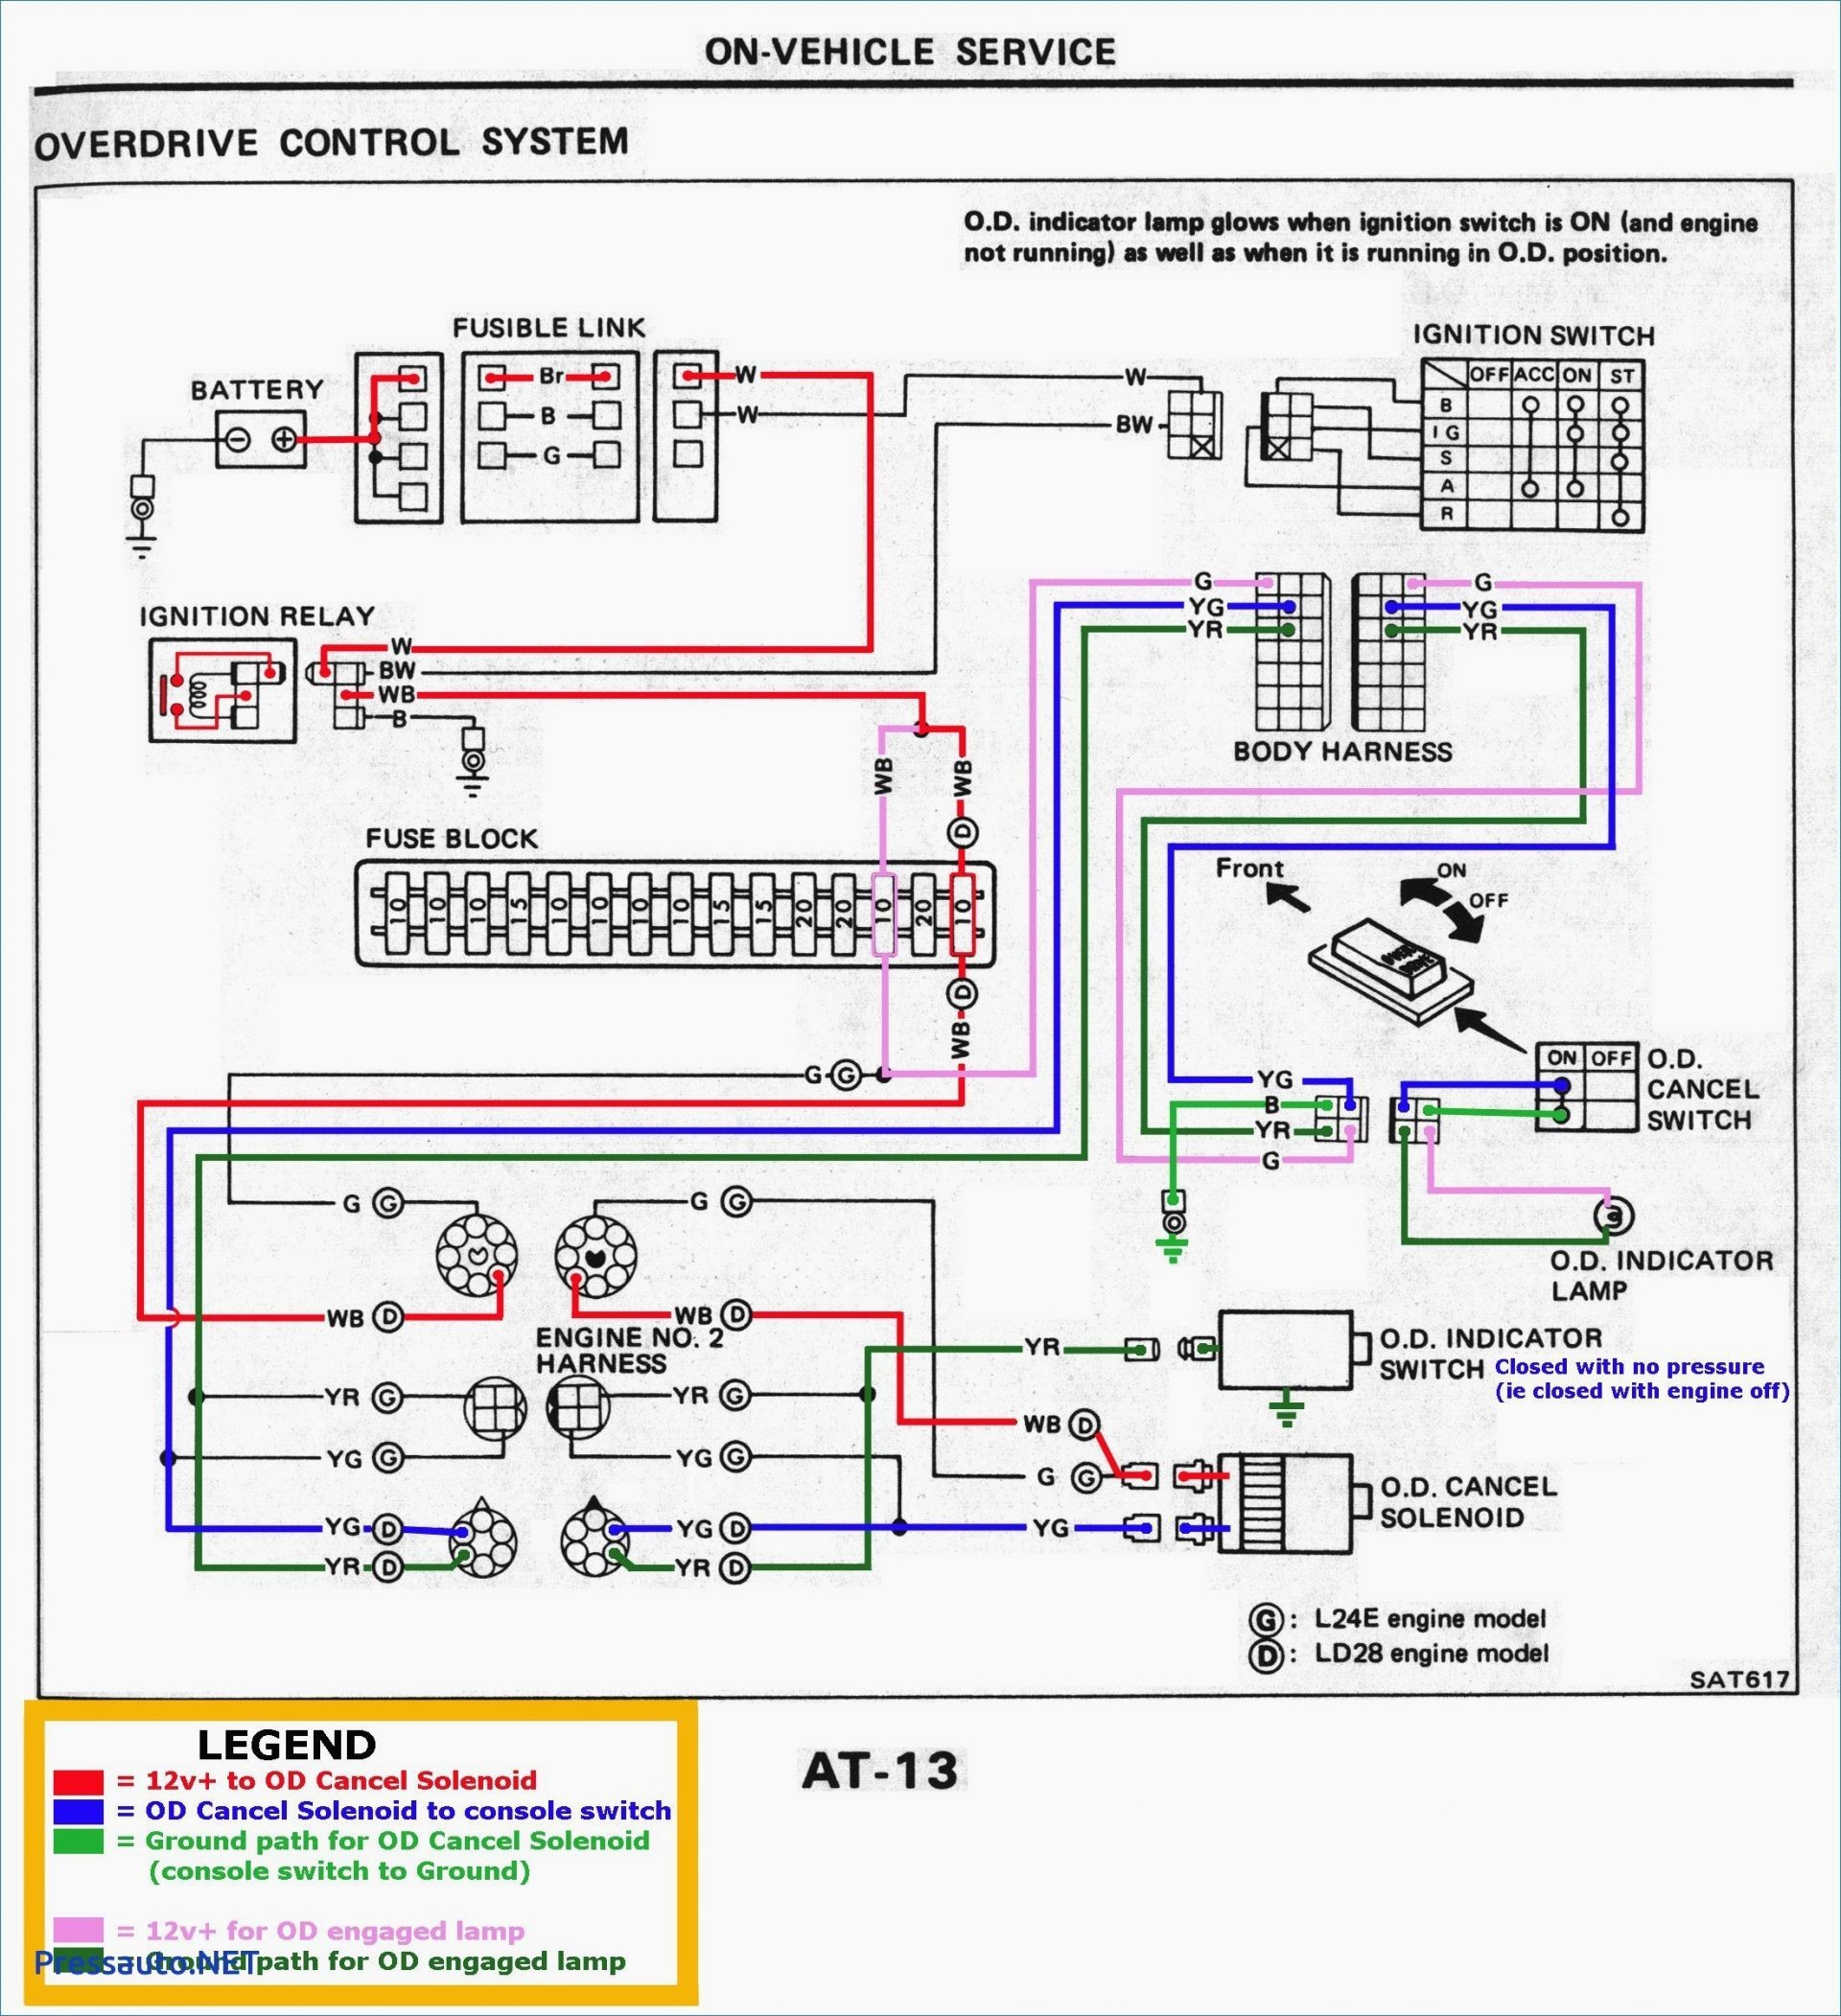 wiring diagram for rear trailer lights save 2003 s10 tail lights rh eugrab 2003s 10